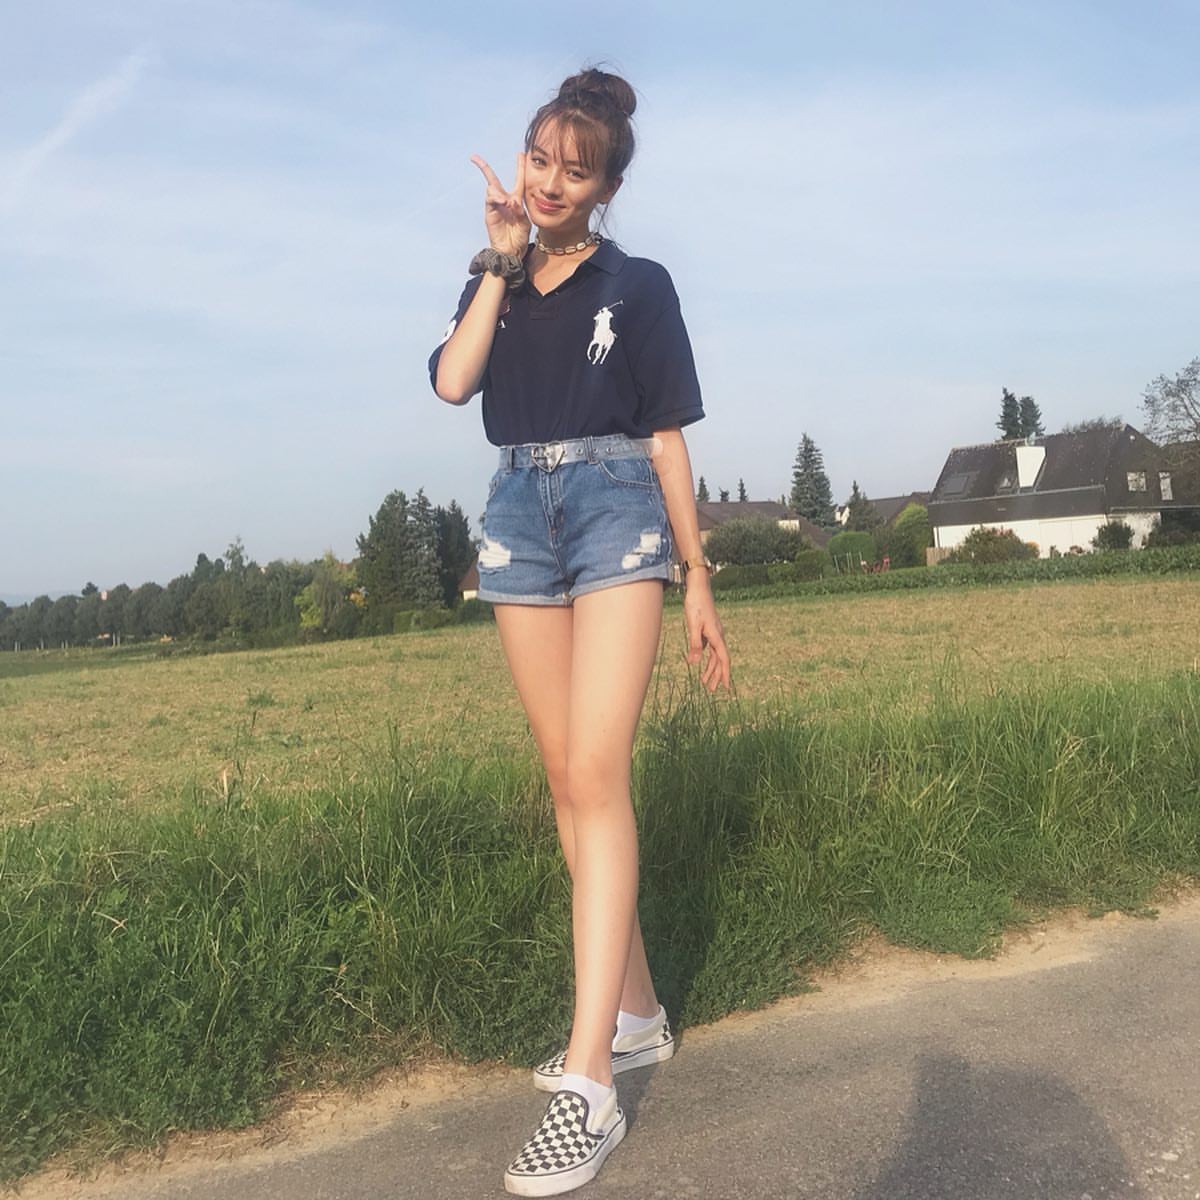 [Image] The current www of a cute German half girl who went out to the world ranking